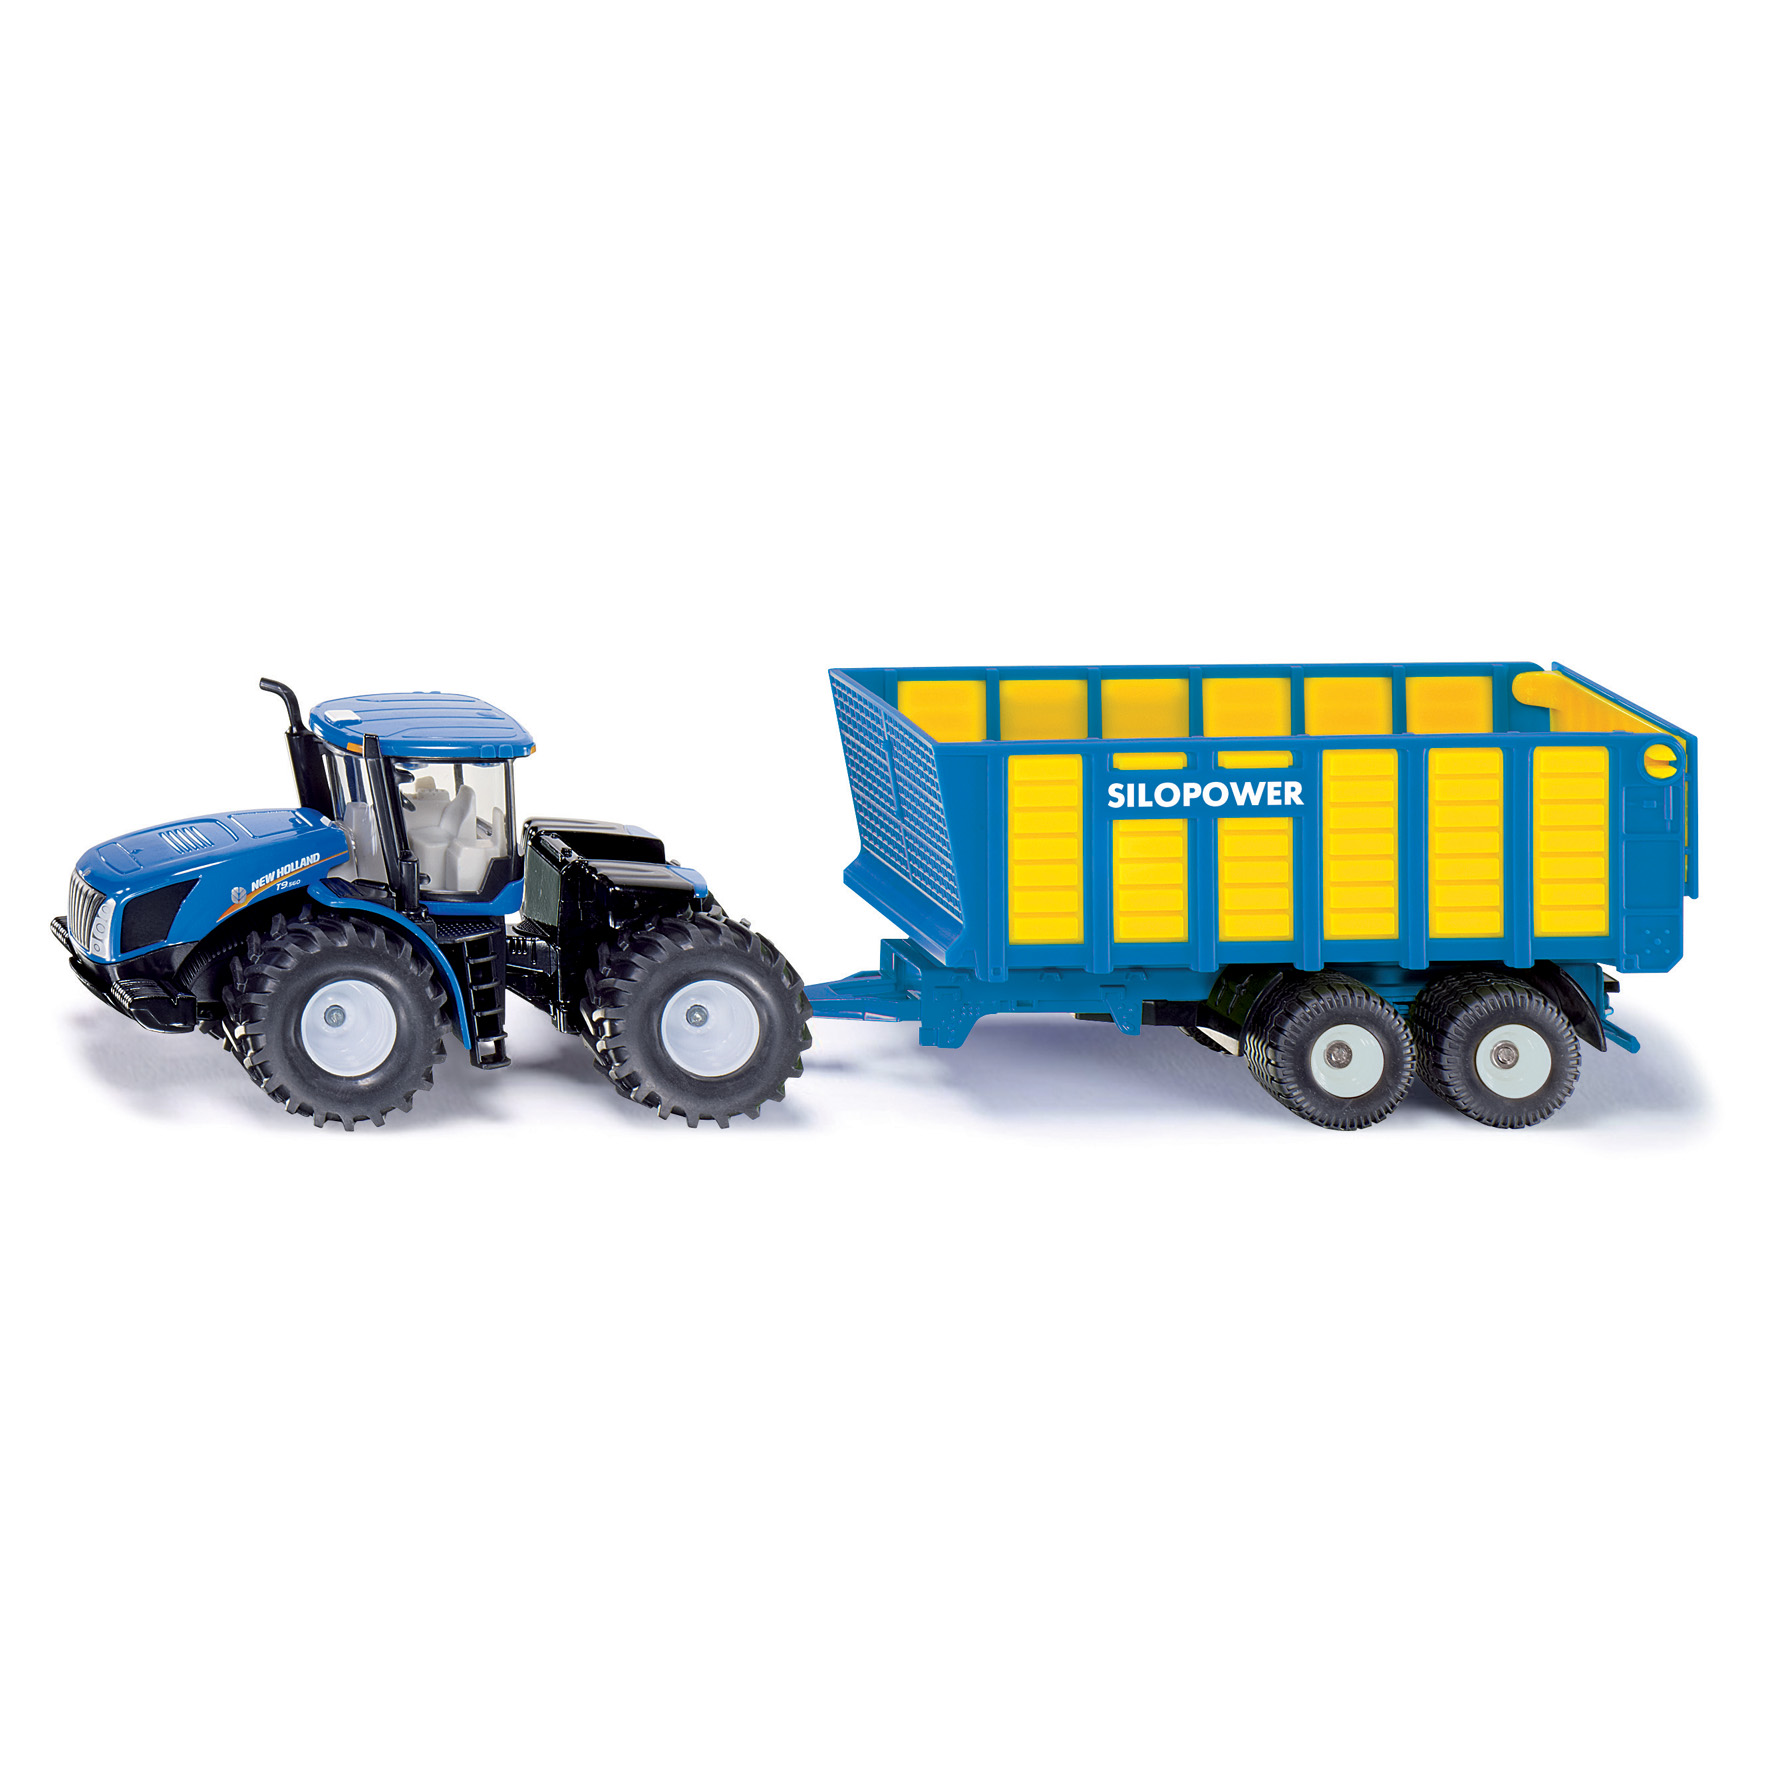 Tractors & Agricultural Vehicles siku tractor new h t9.560 1:50